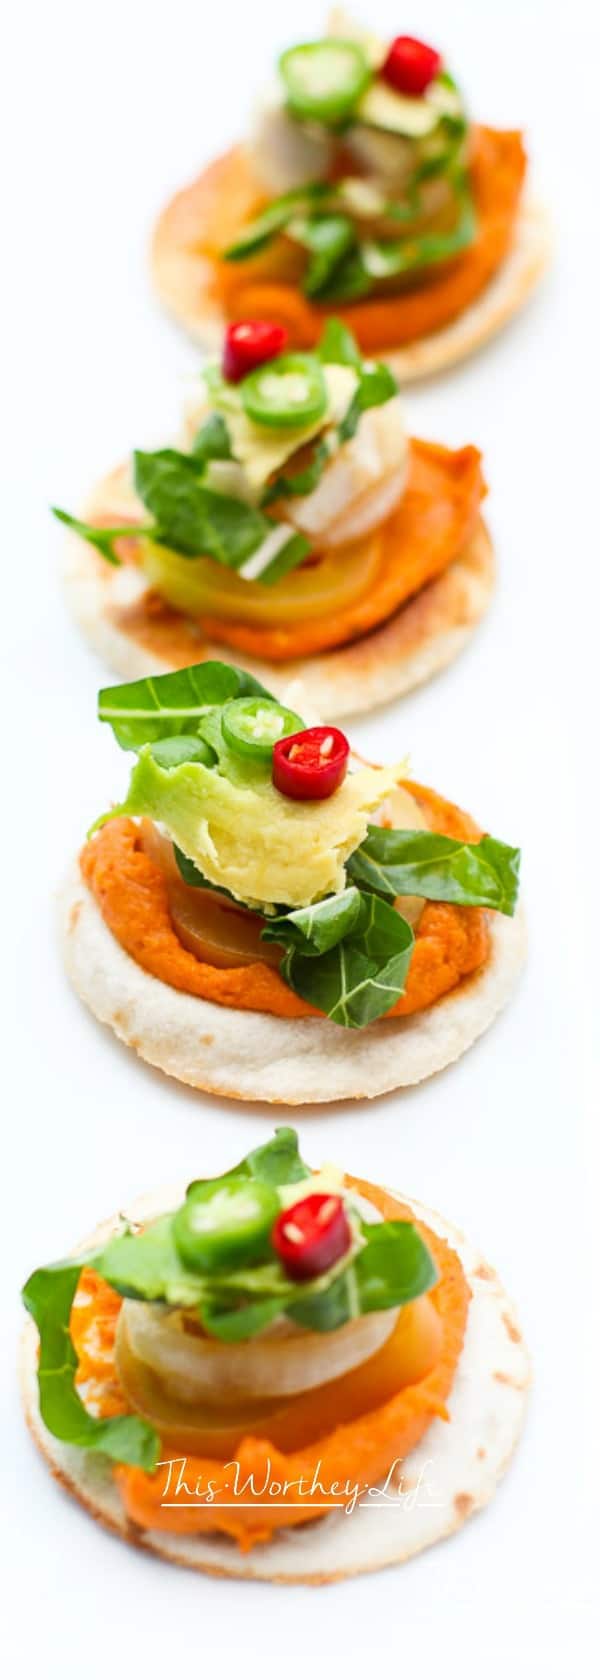 Get ready for game day with our fun appetizer using Sabra's Taco Inspired Hummus, plus chicken, fresh vegetables, laid on a flour tortilla.  This easy appetizer will also be great to serve over the holidays, including Christmas appetizers, and a New Year's Eve party. Plus, when you're getting ready for the Superbowl, this chicken and hummus appetizer will be a crowd favorite!